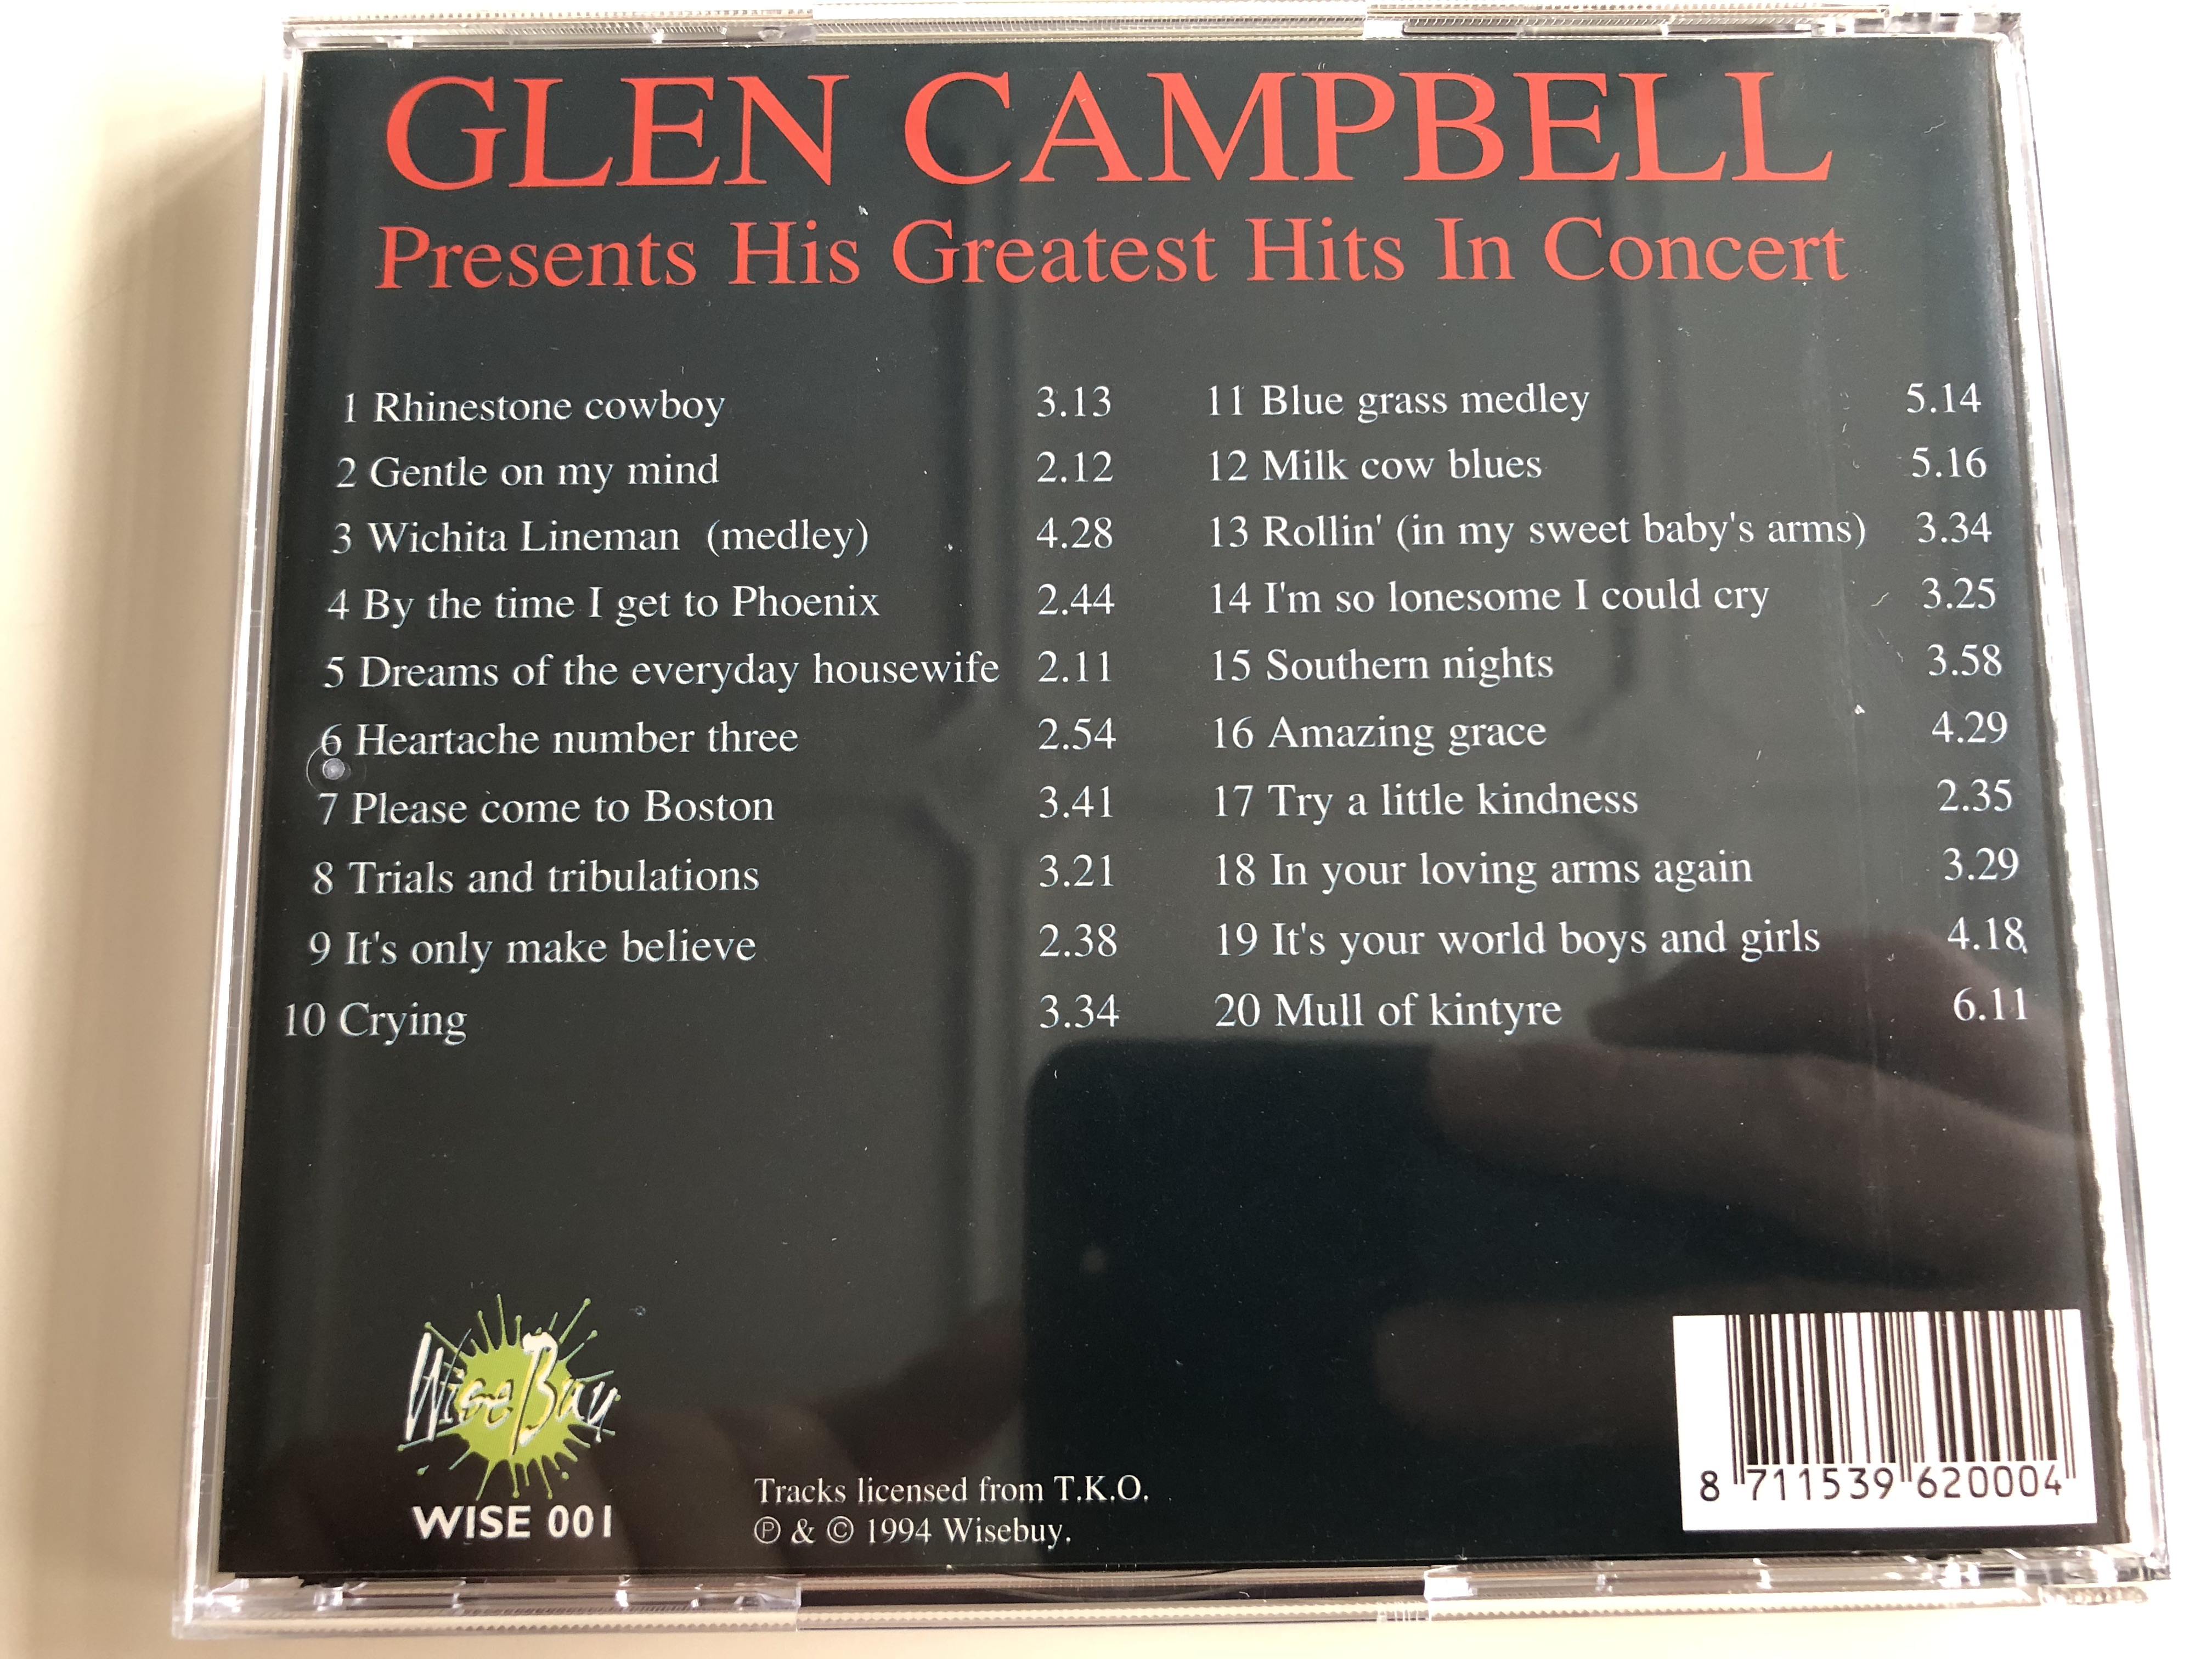 glen-campbell-presents-his-greatest-hits-in-concert-rhinestone-cowboy-gentle-on-my-mind-crying-mull-of-kintyre-and-many-more-audio-cd-1994-wise-001-5-.jpg